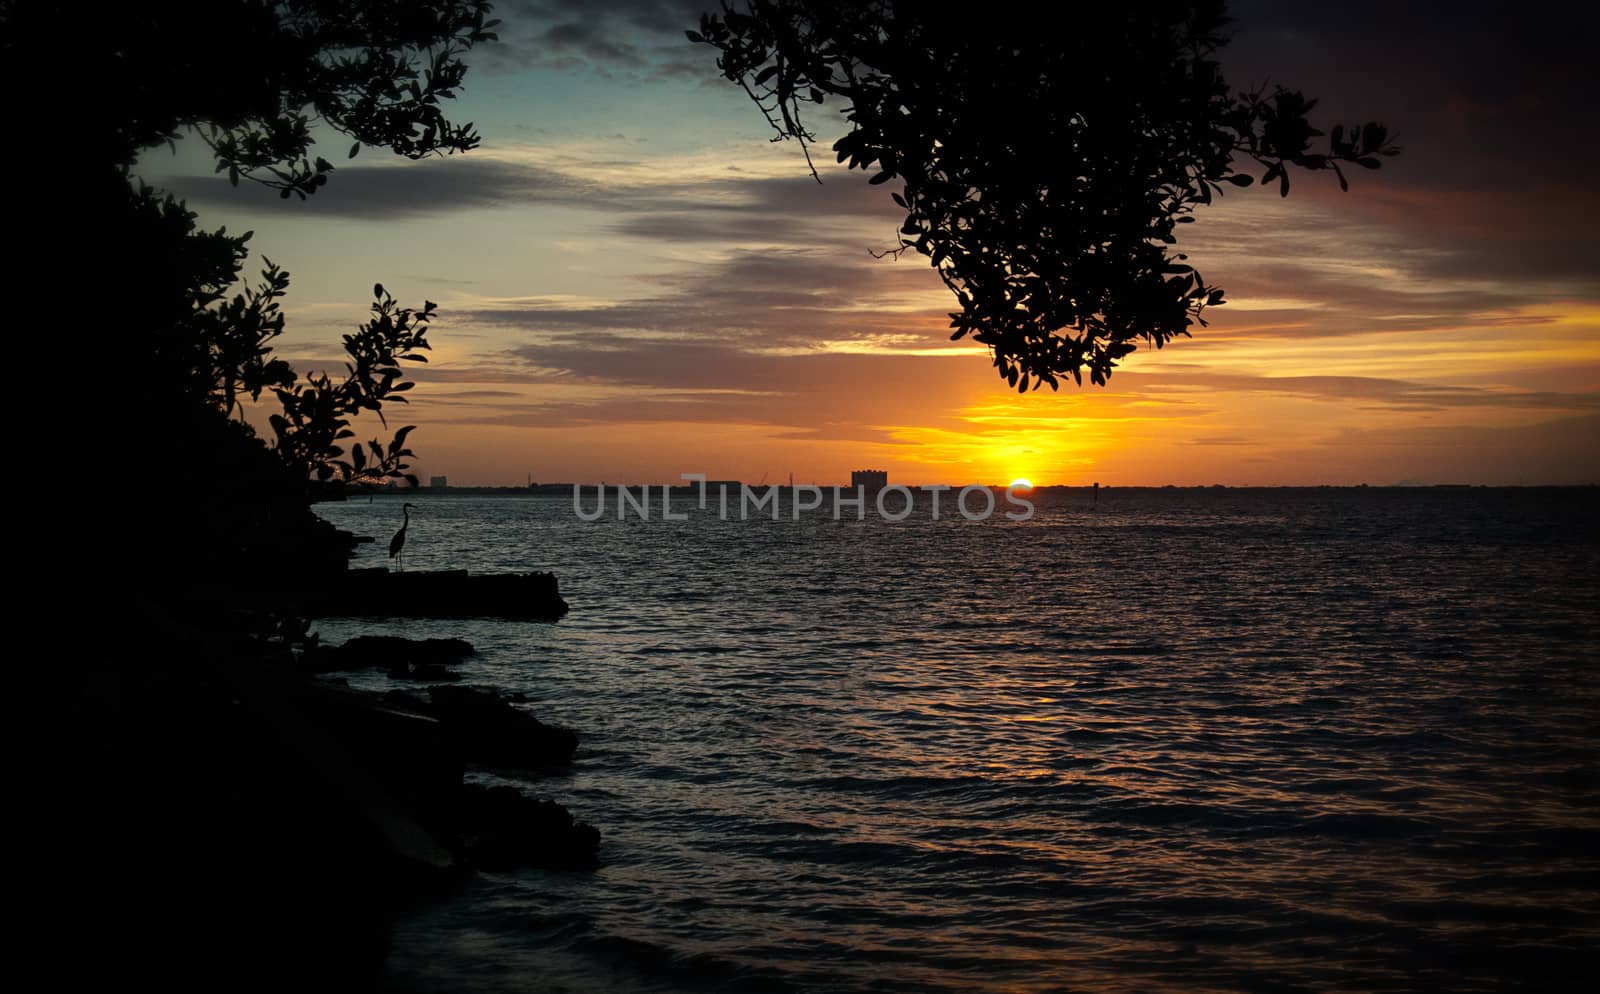 Sunrise over Tampa Bay with heron silhouette, foliage and rocks, Florida